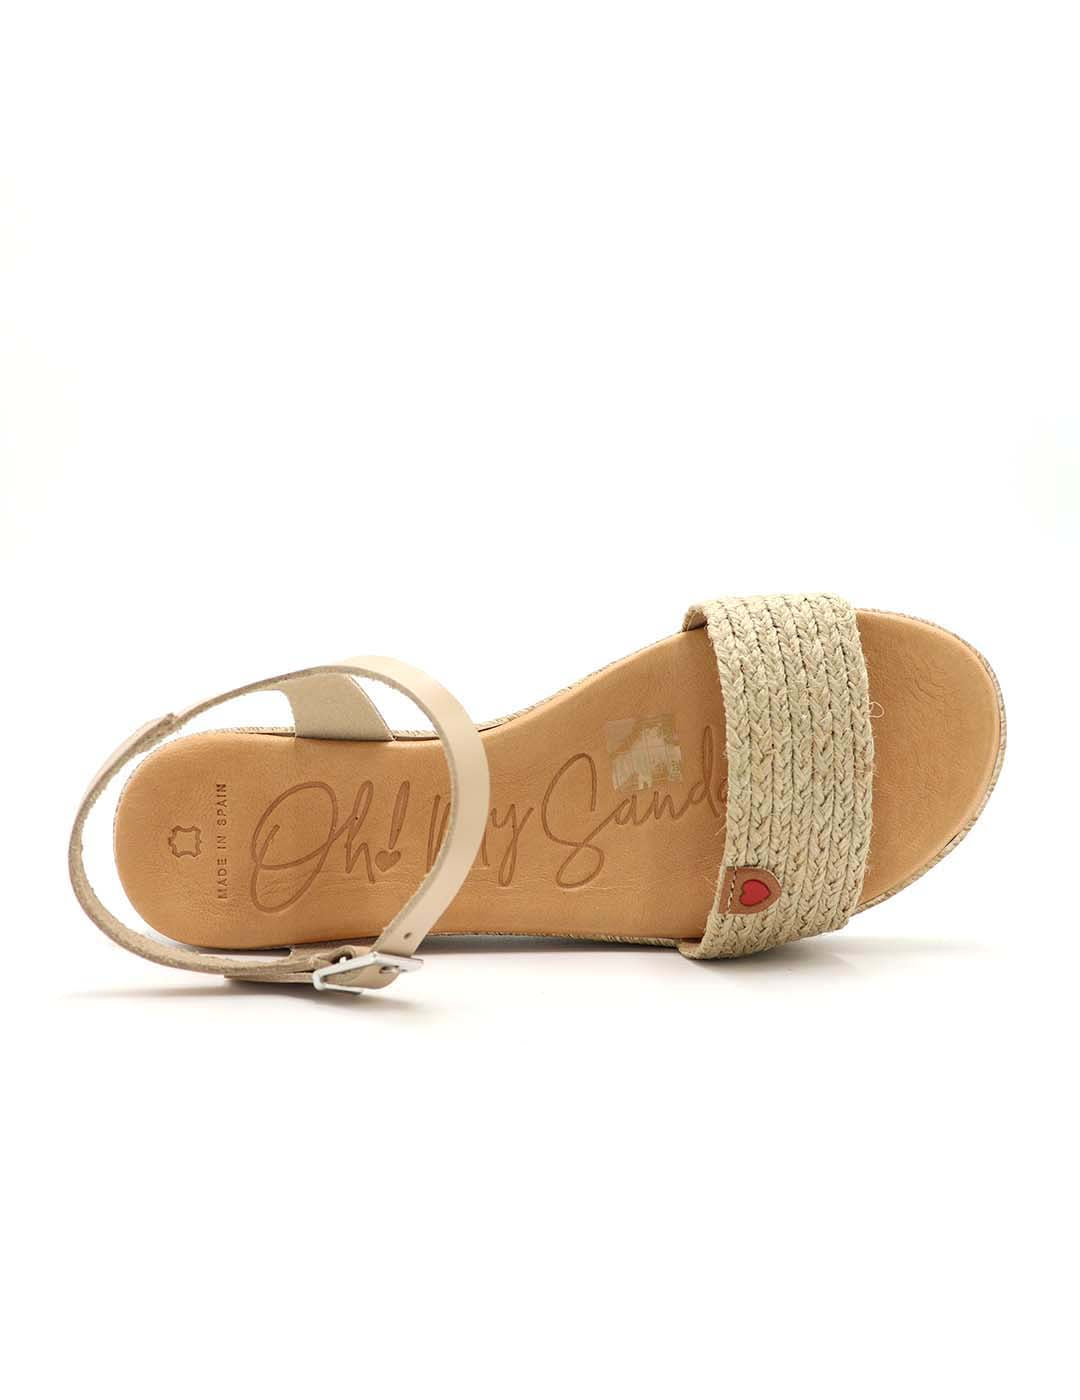 Sandalia OH! MY SANDALS Mujer Taupe / Beig